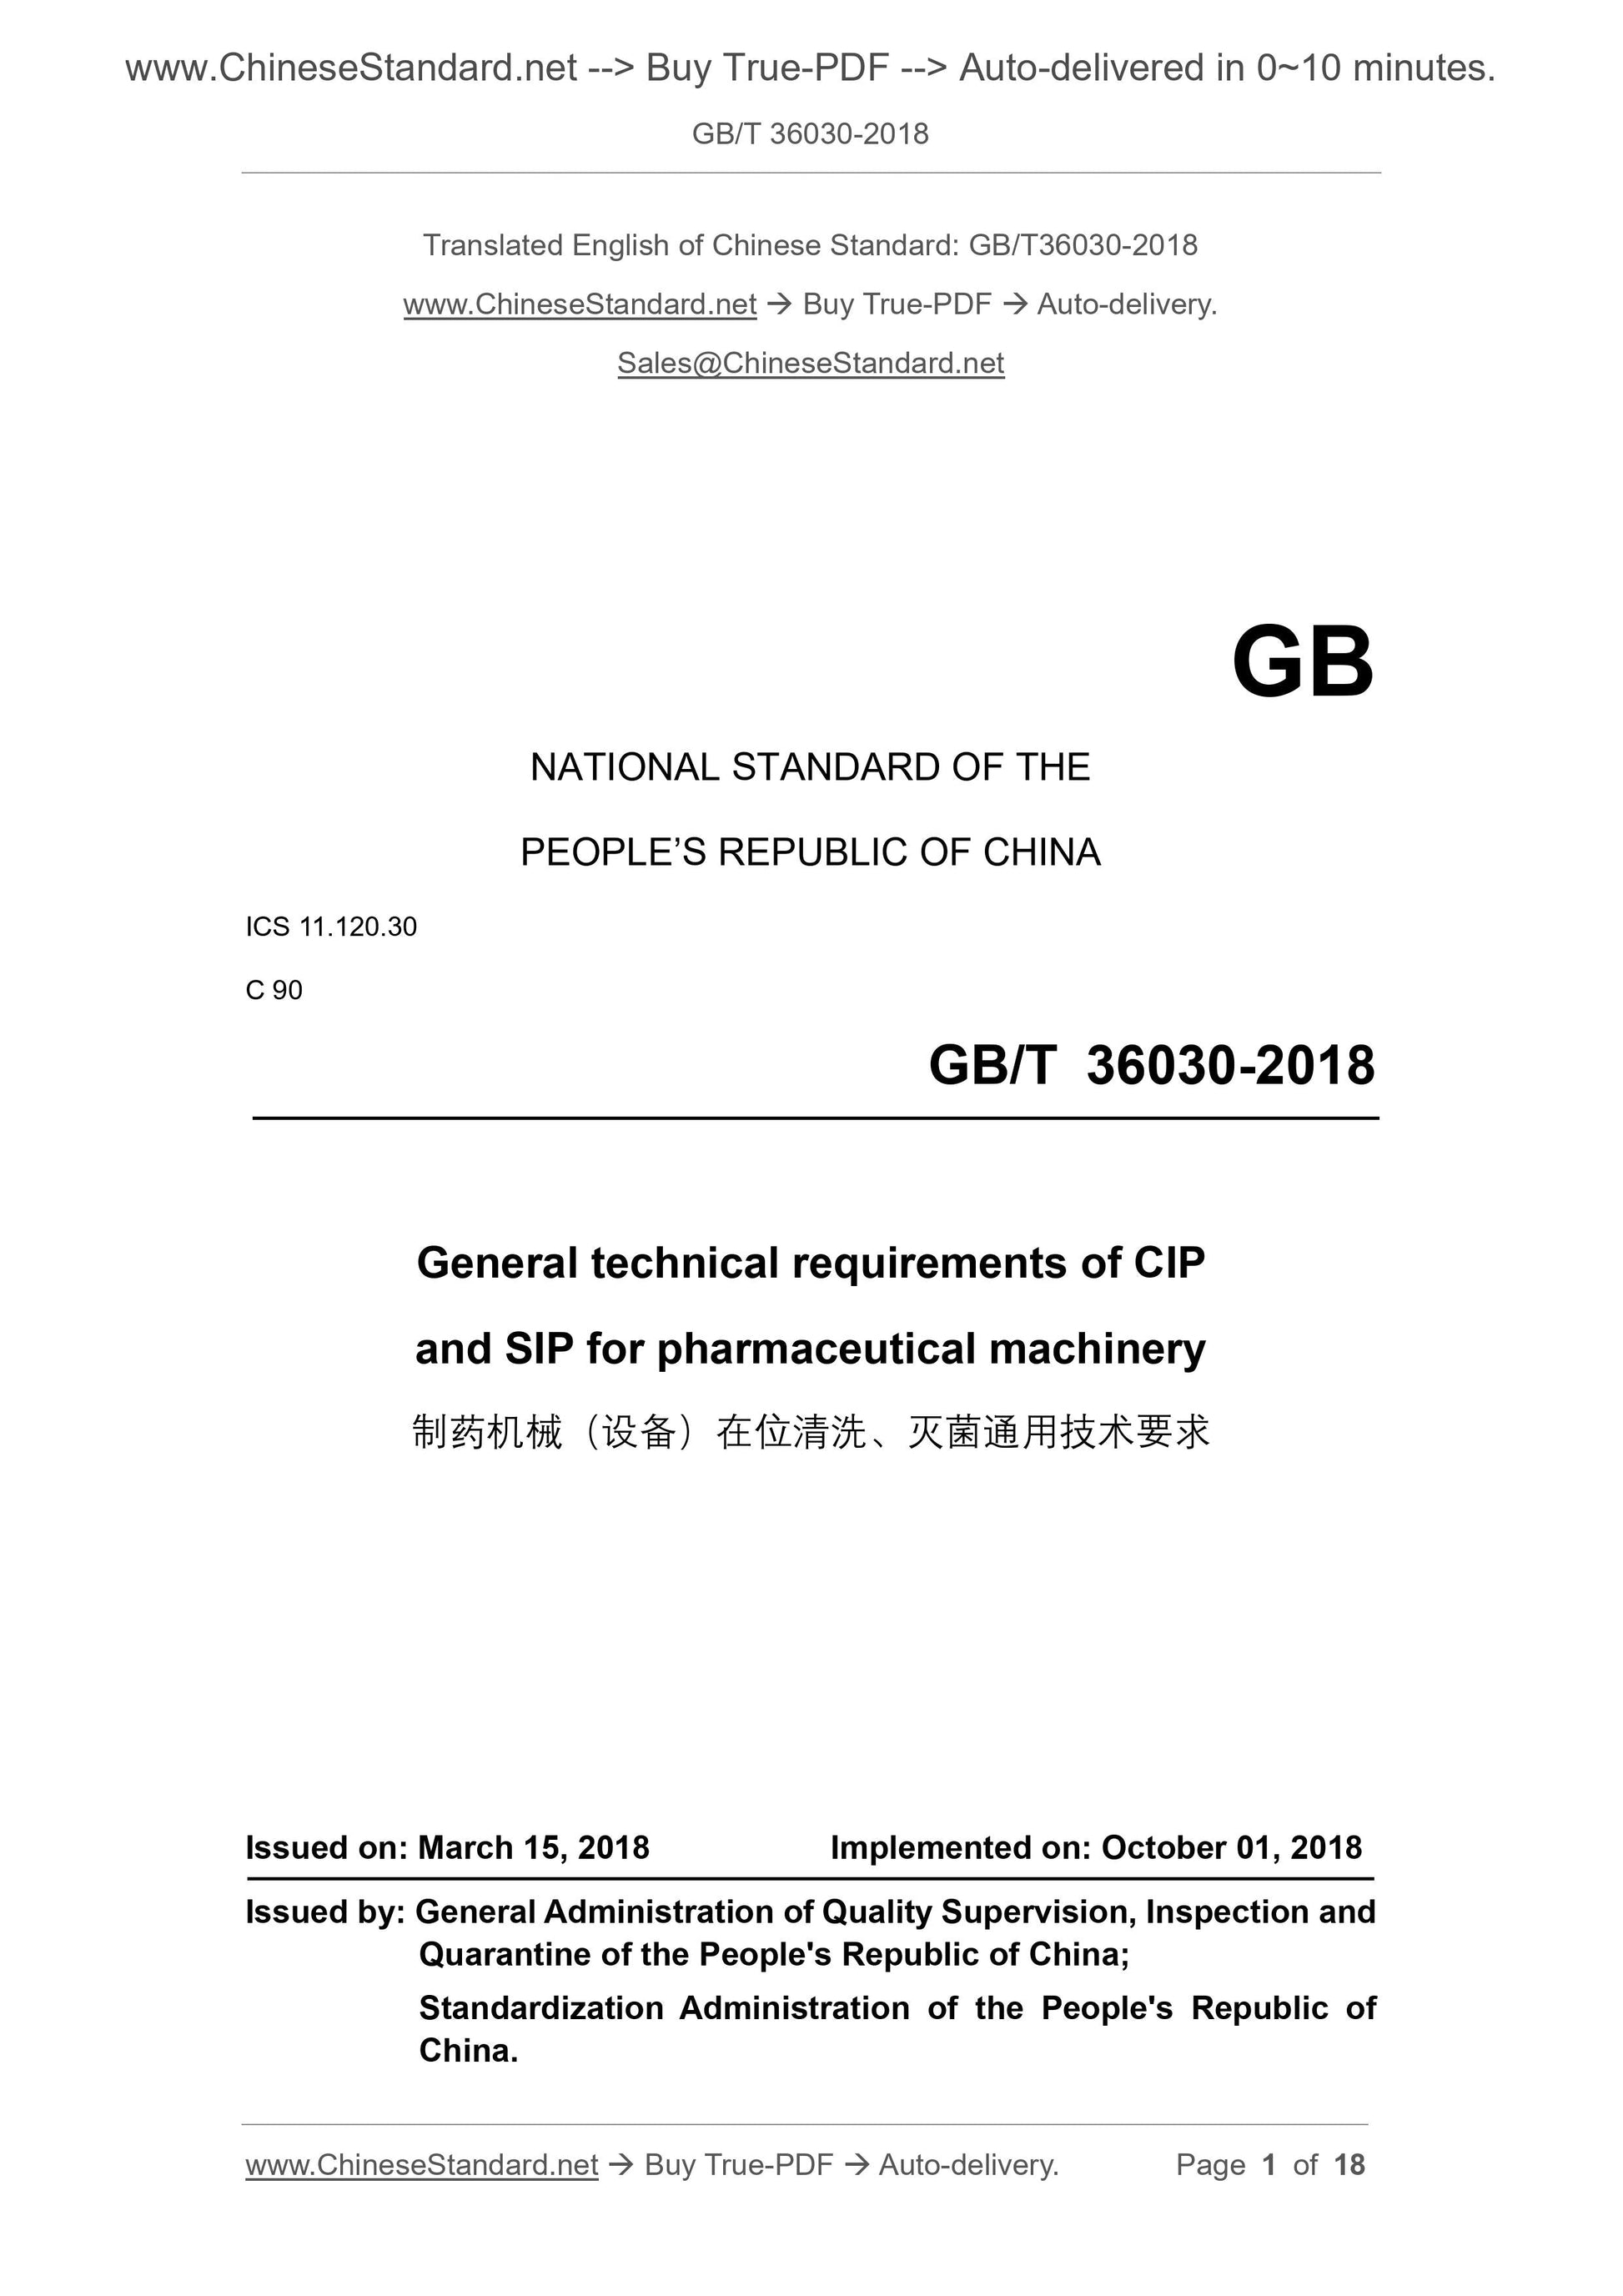 GB/T 36030-2018 Page 1